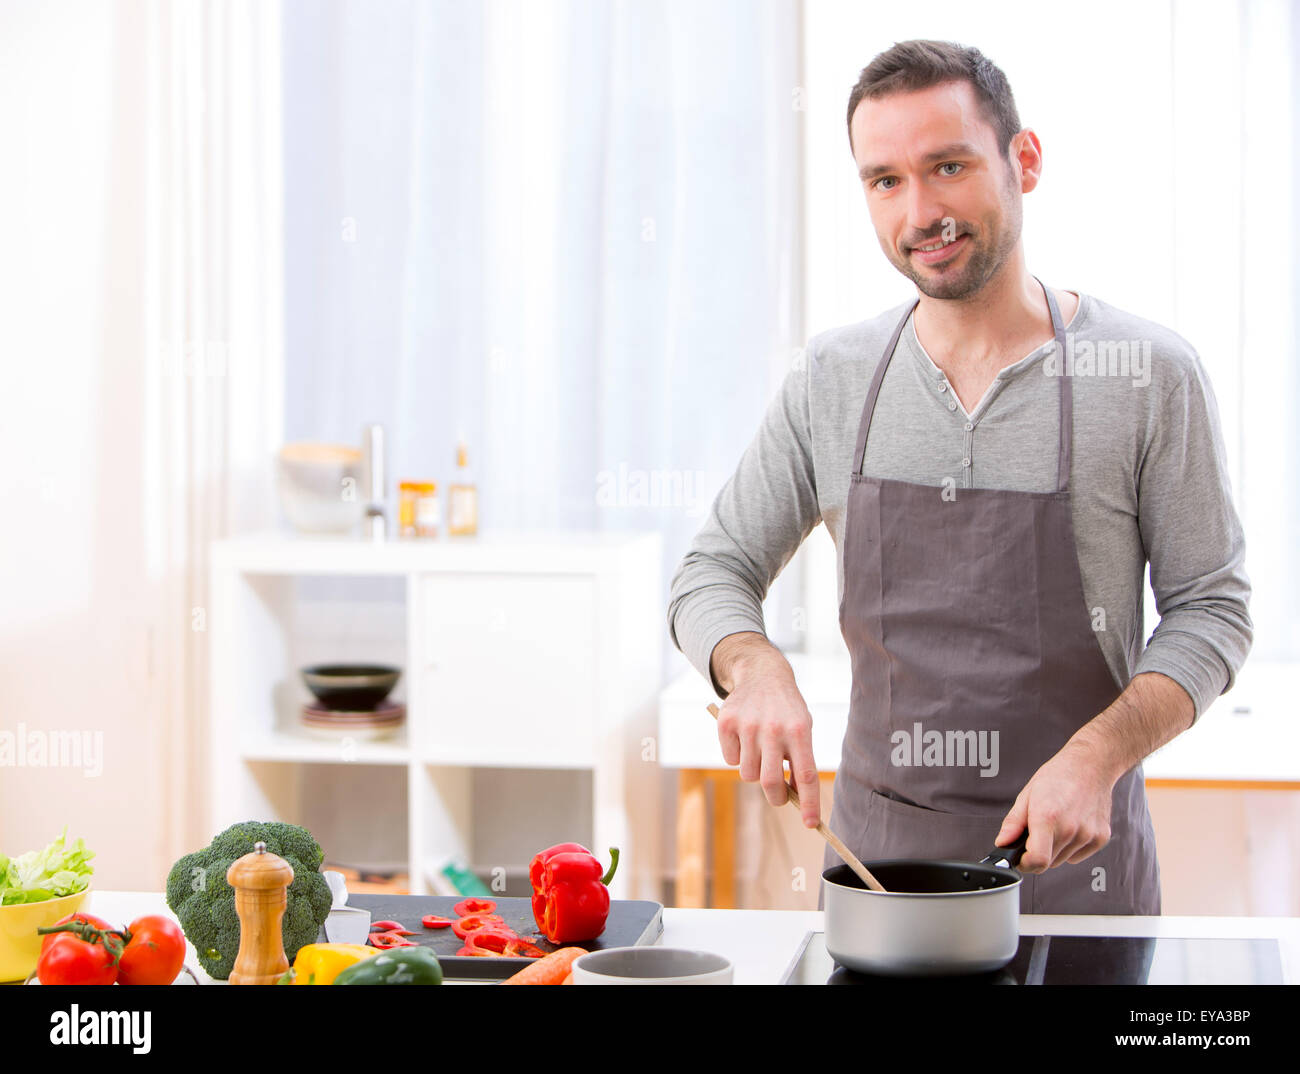 View of a Young attractive man cooking in a kitchen Stock Photo